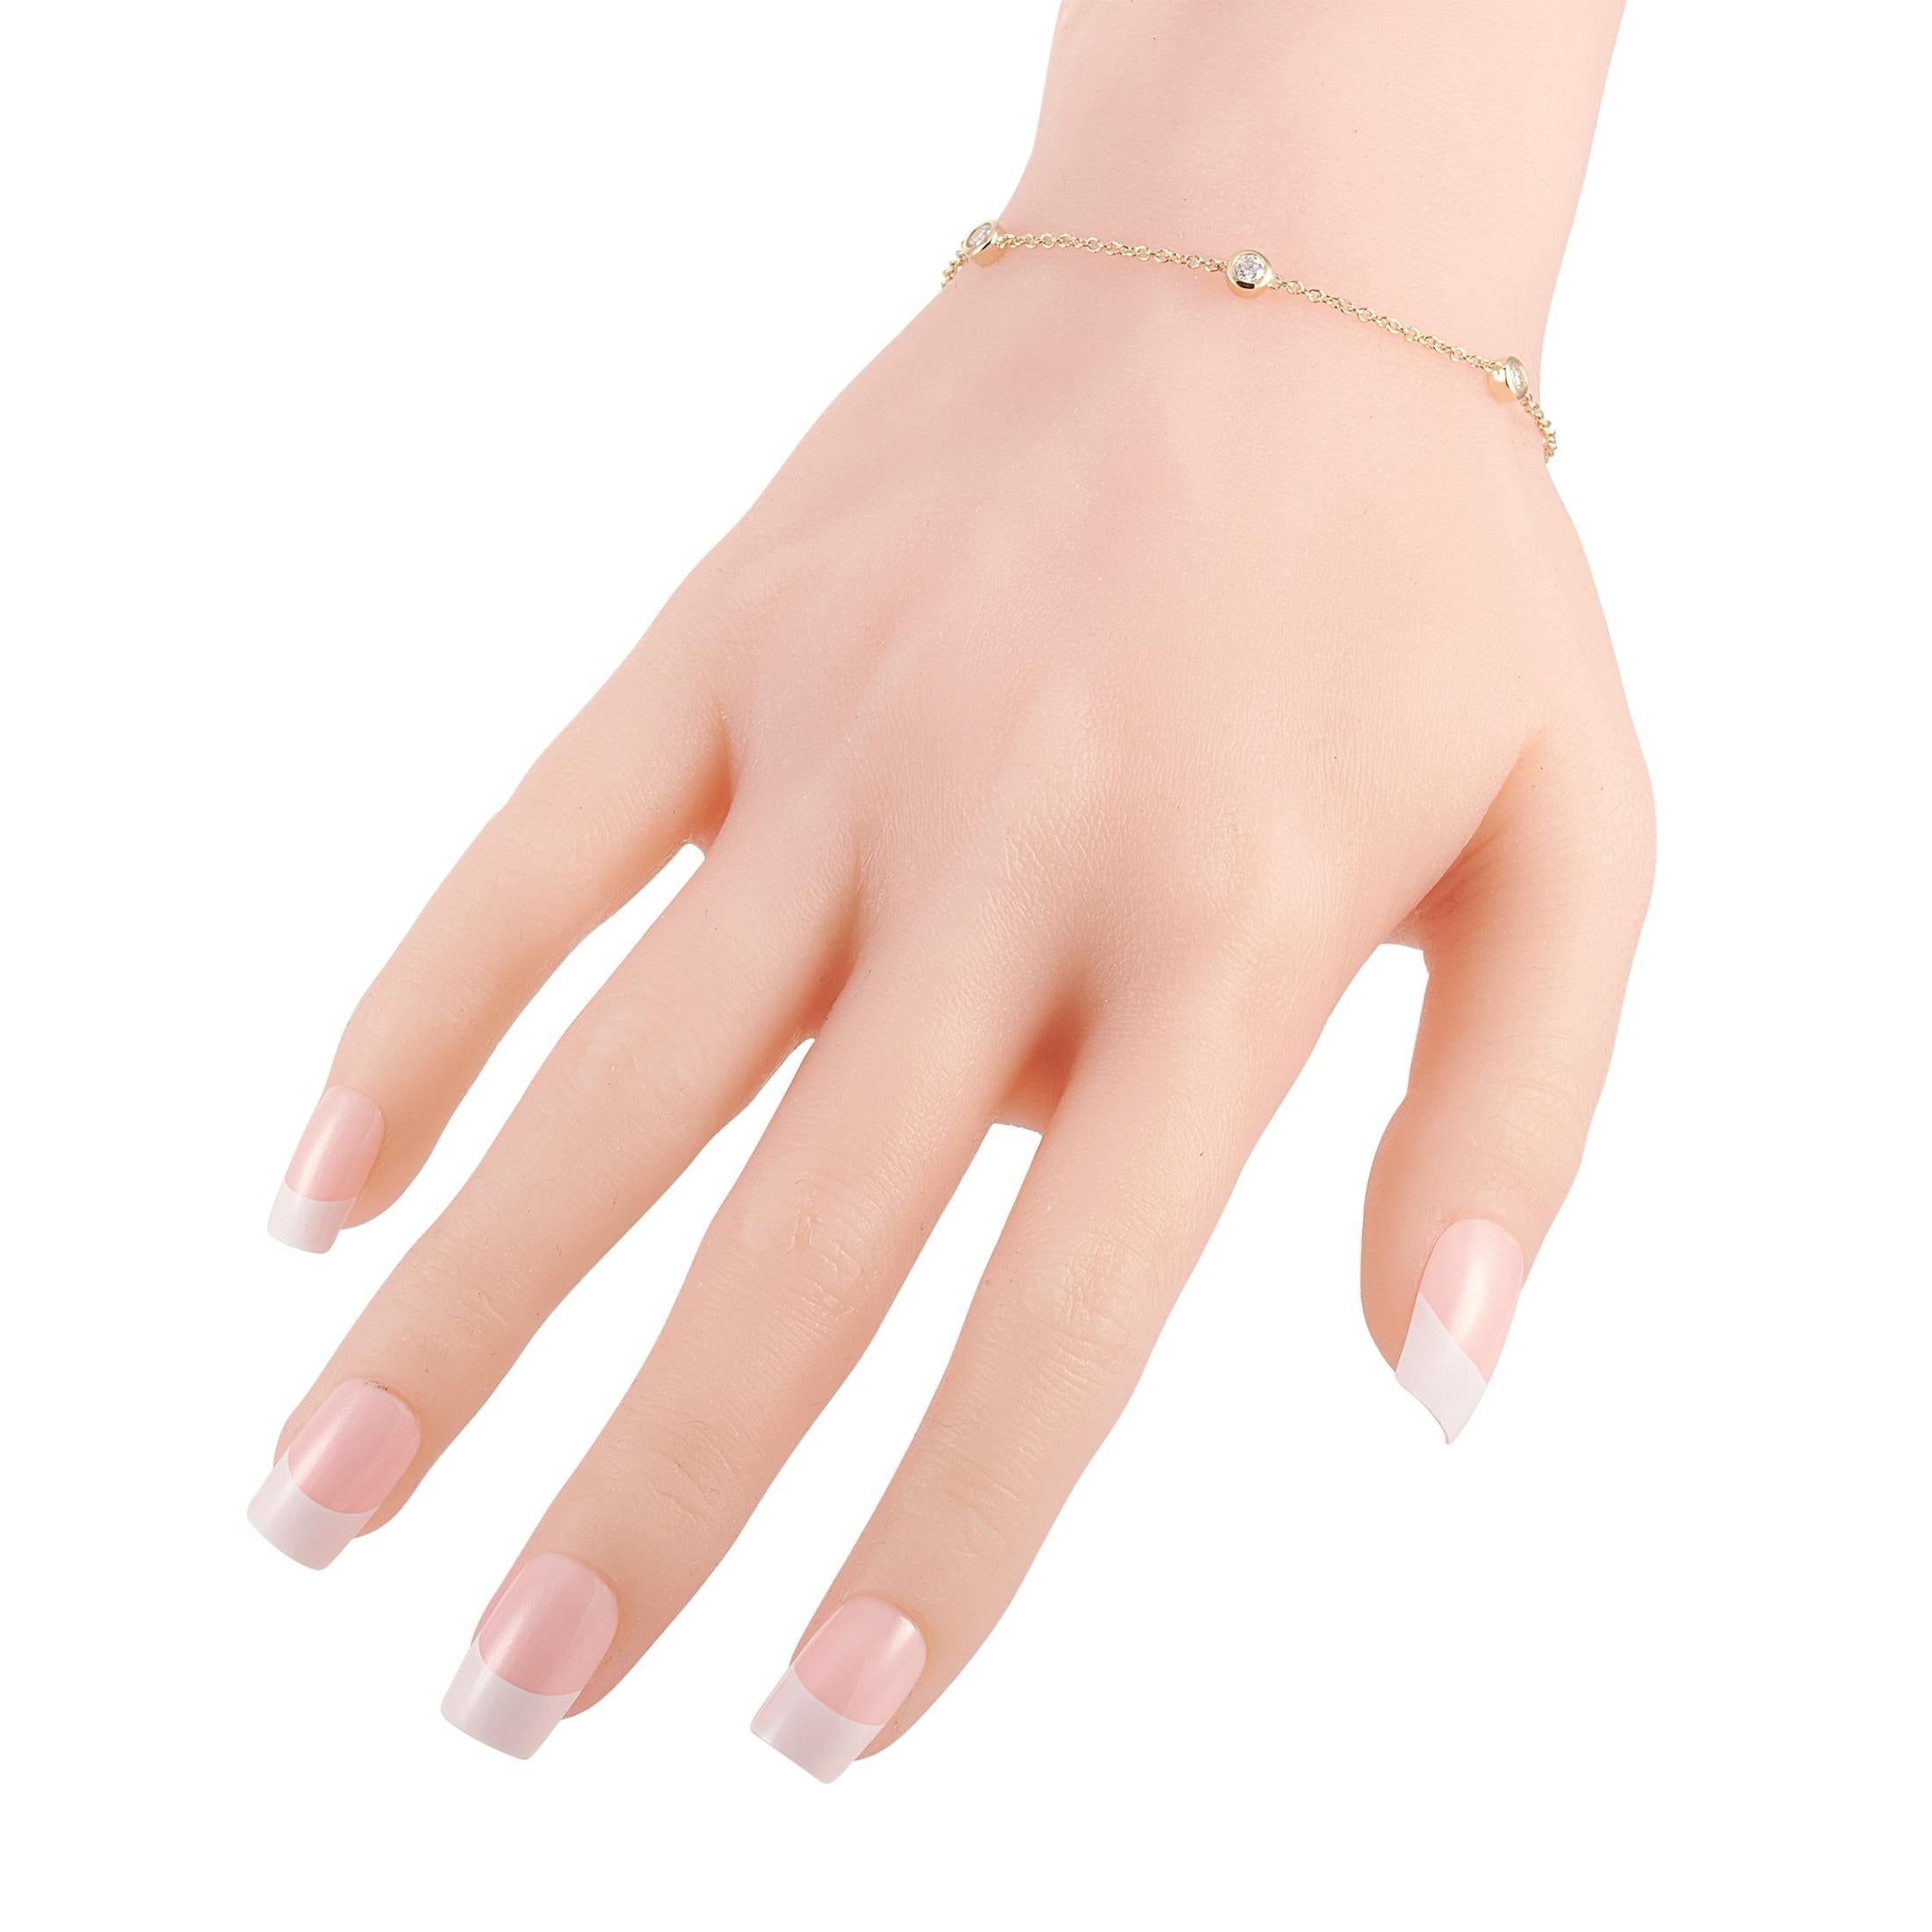 This LB Exclusive bracelet is crafted from 14K yellow gold and weighs 2.4 grams, measuring 6.50” in length. The bracelet is set with diamonds that total 0.50 carats.
 
 Offered in brand new condition, this item includes a gift box.
